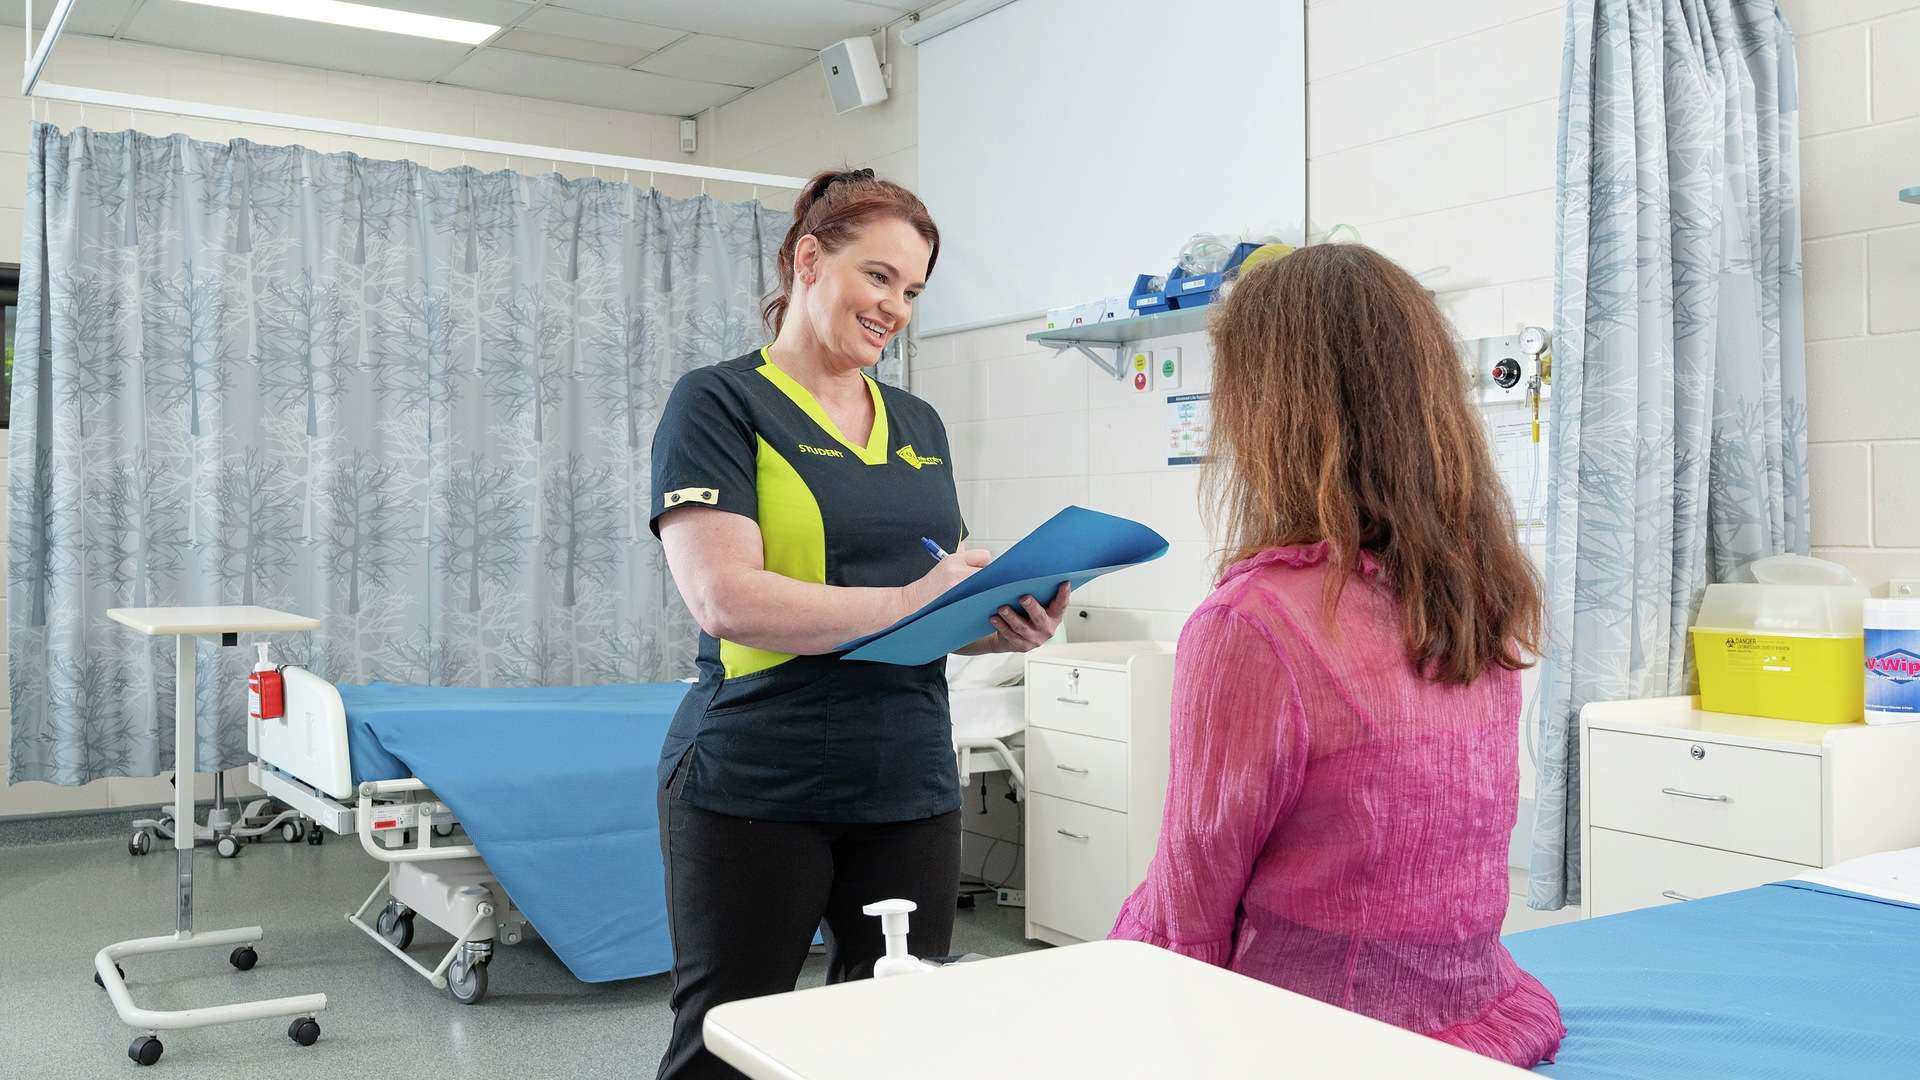 Nurse talks to patient holding a clipboard in a hospital ward.